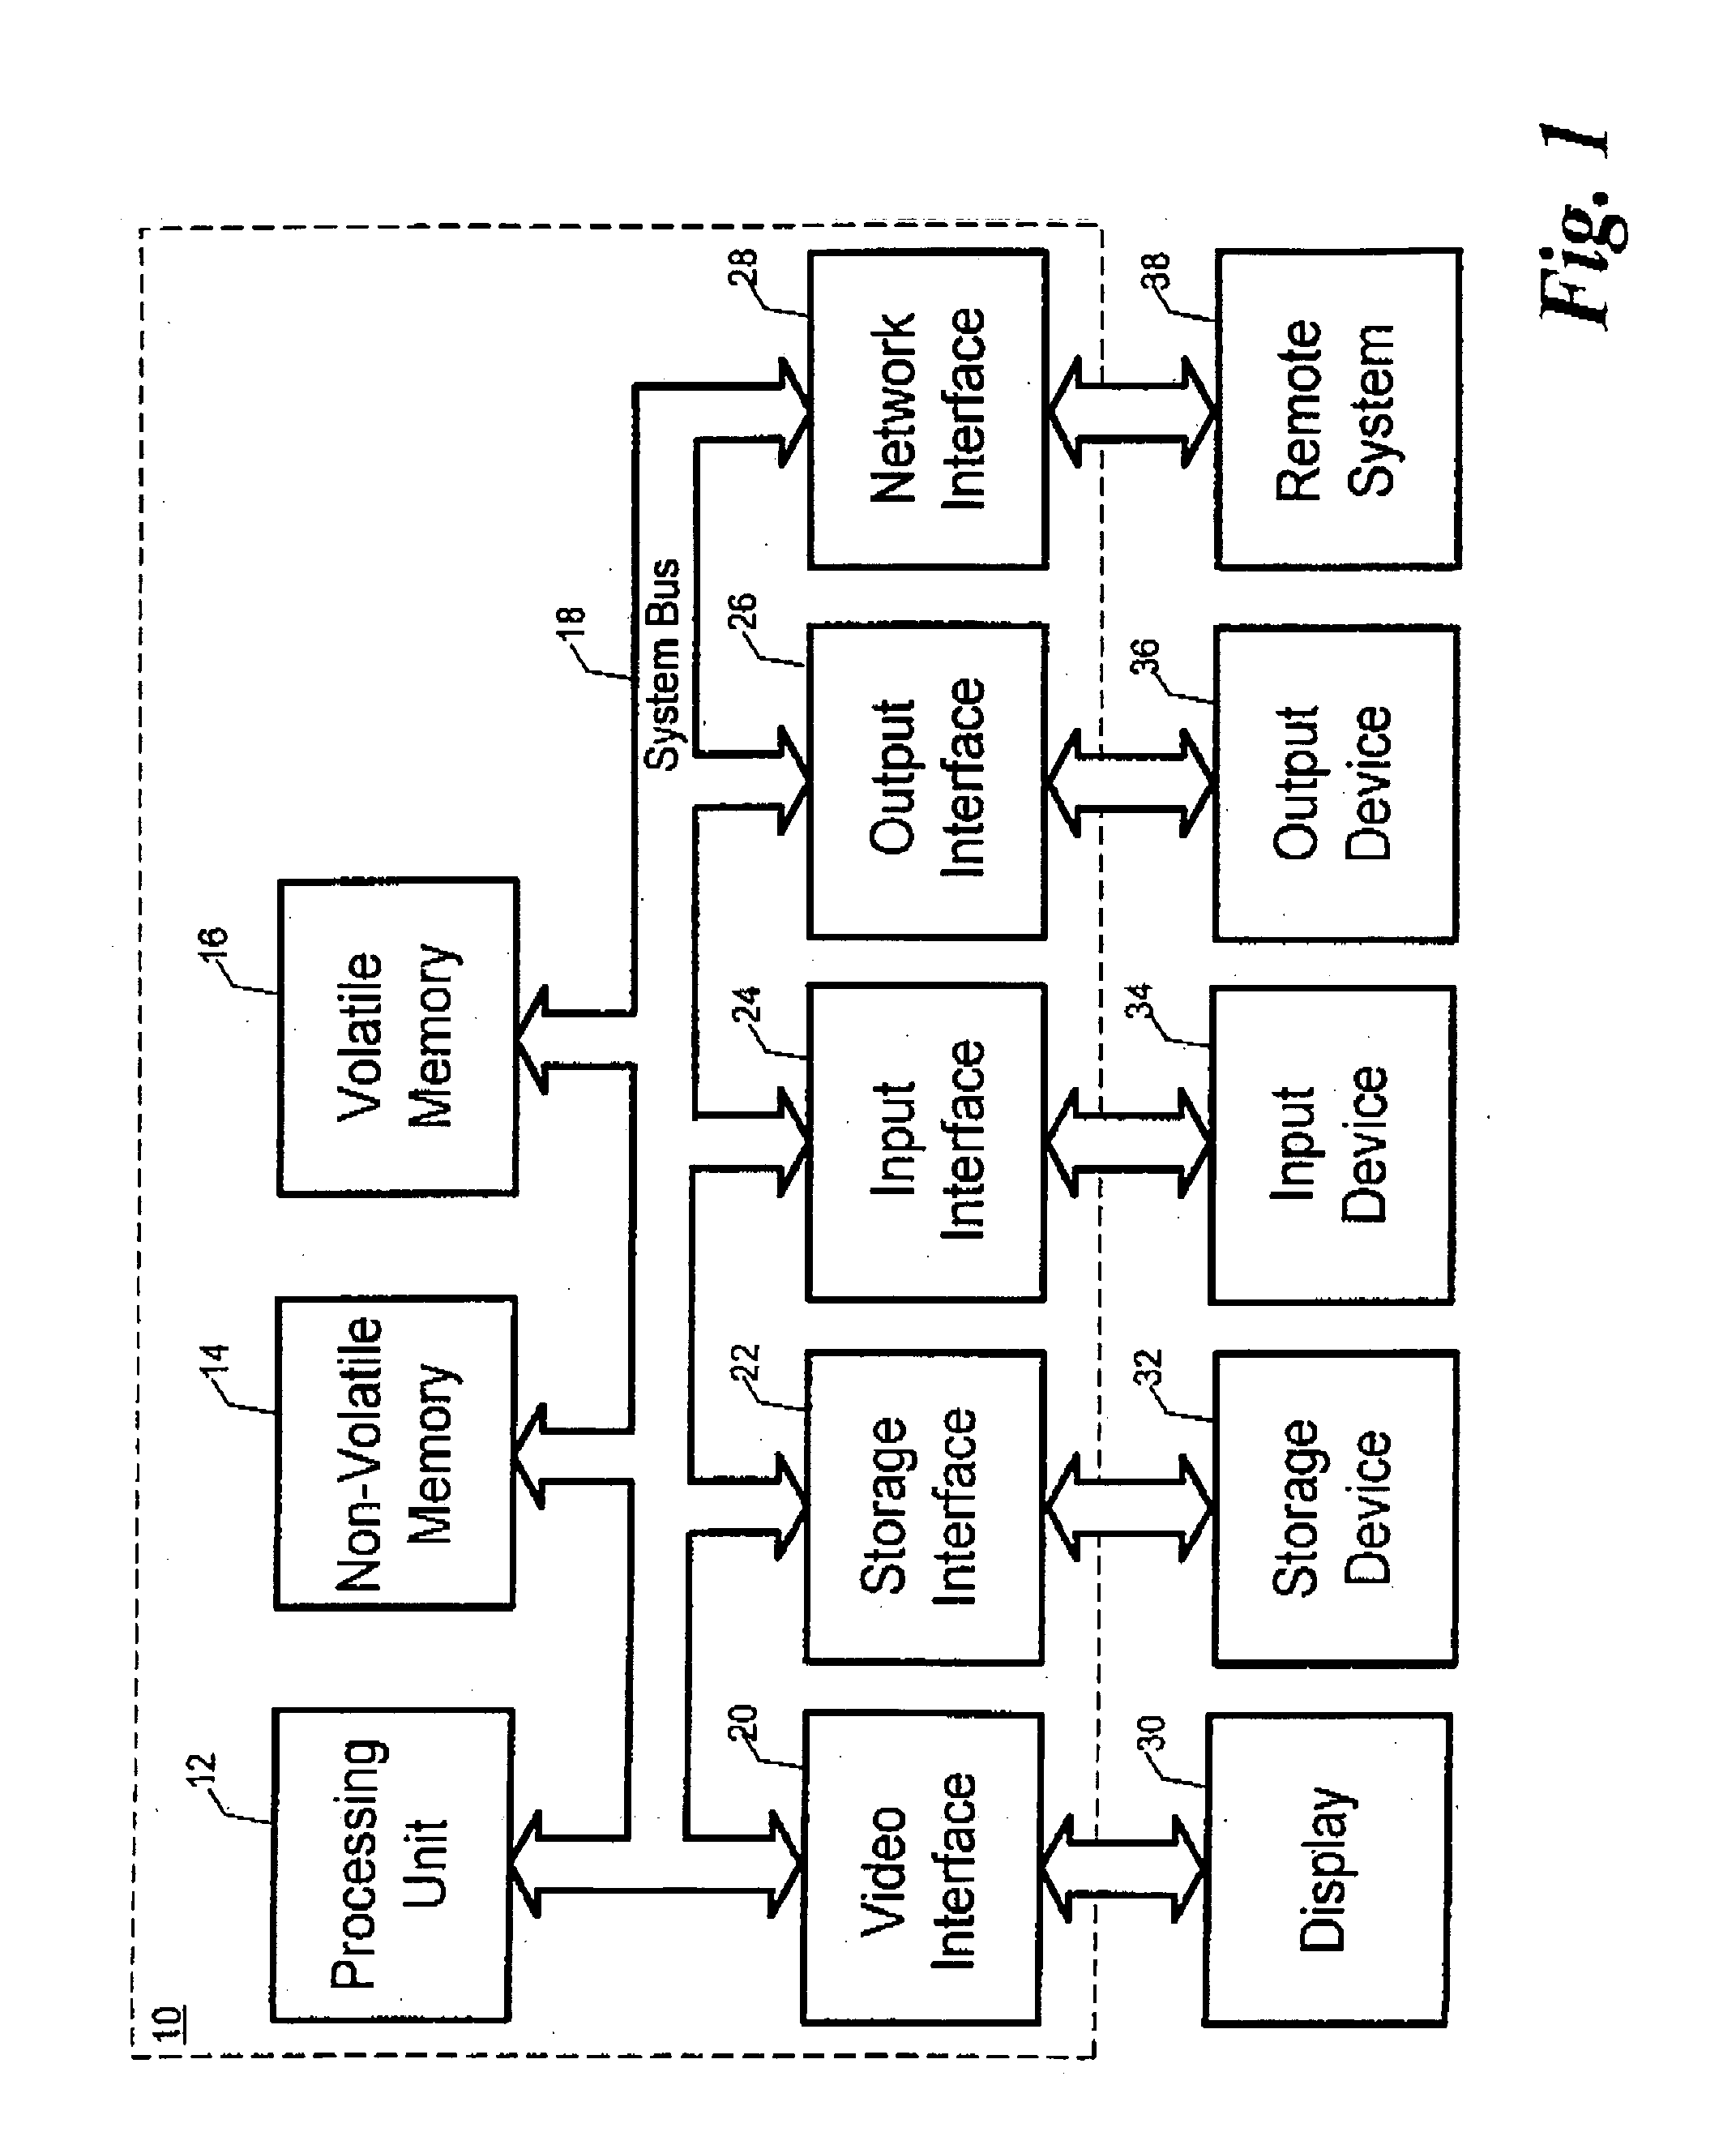 System and method for preparing, executing, and securely managing electronic documents